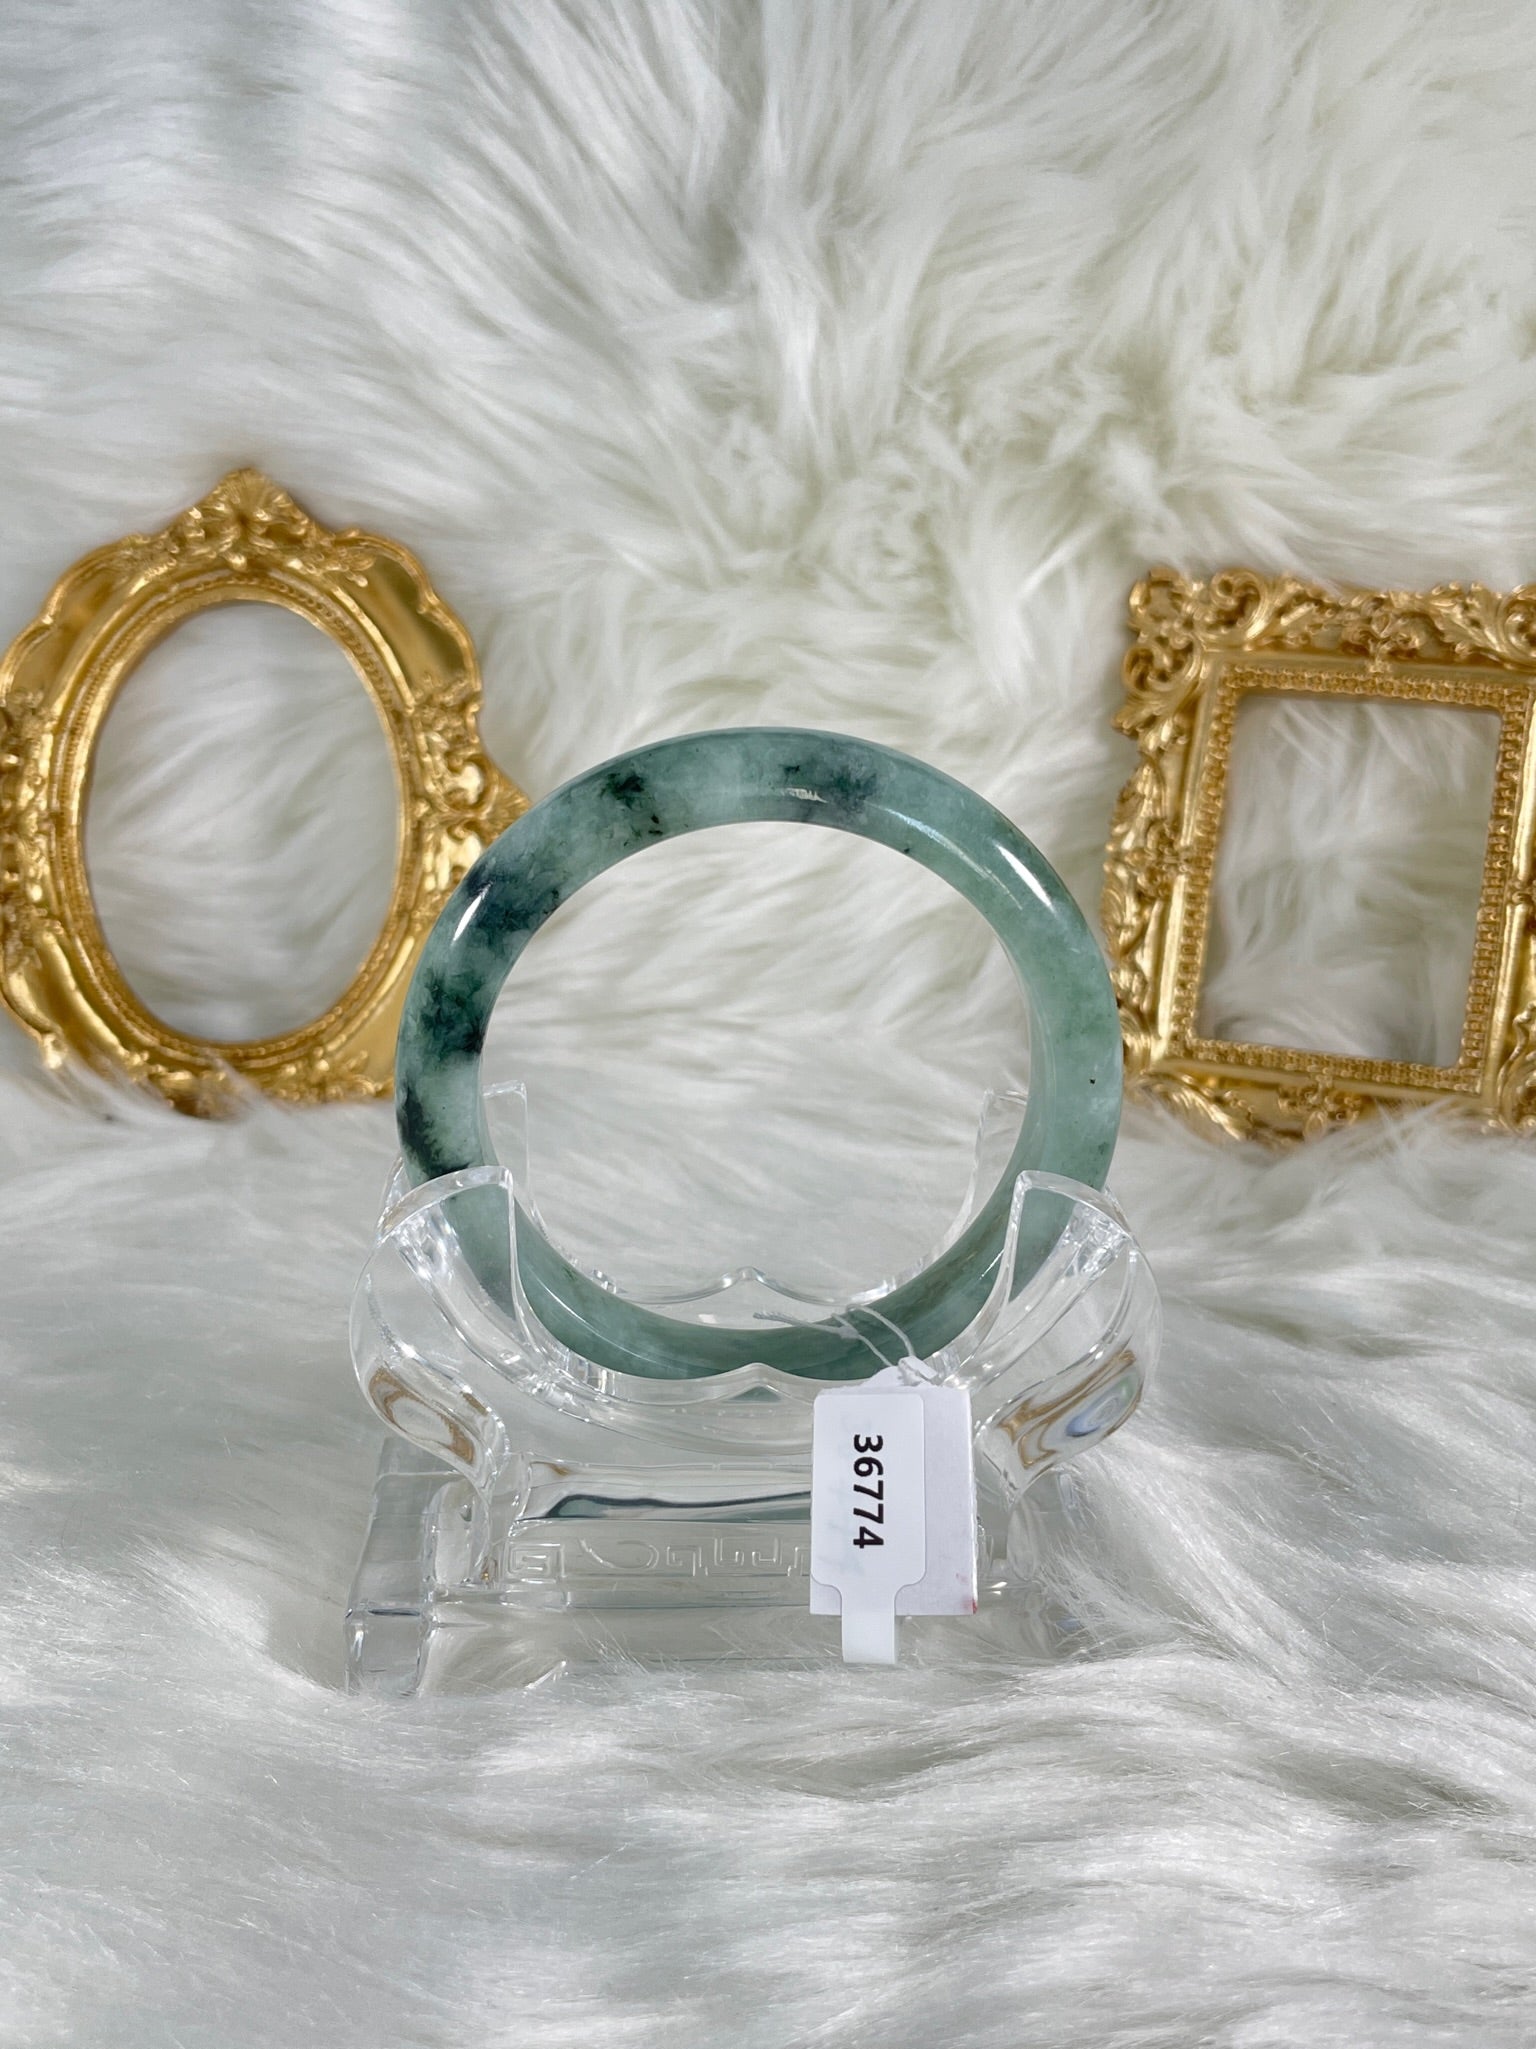 Grade A Natural Jade Bangle with certificate #36774